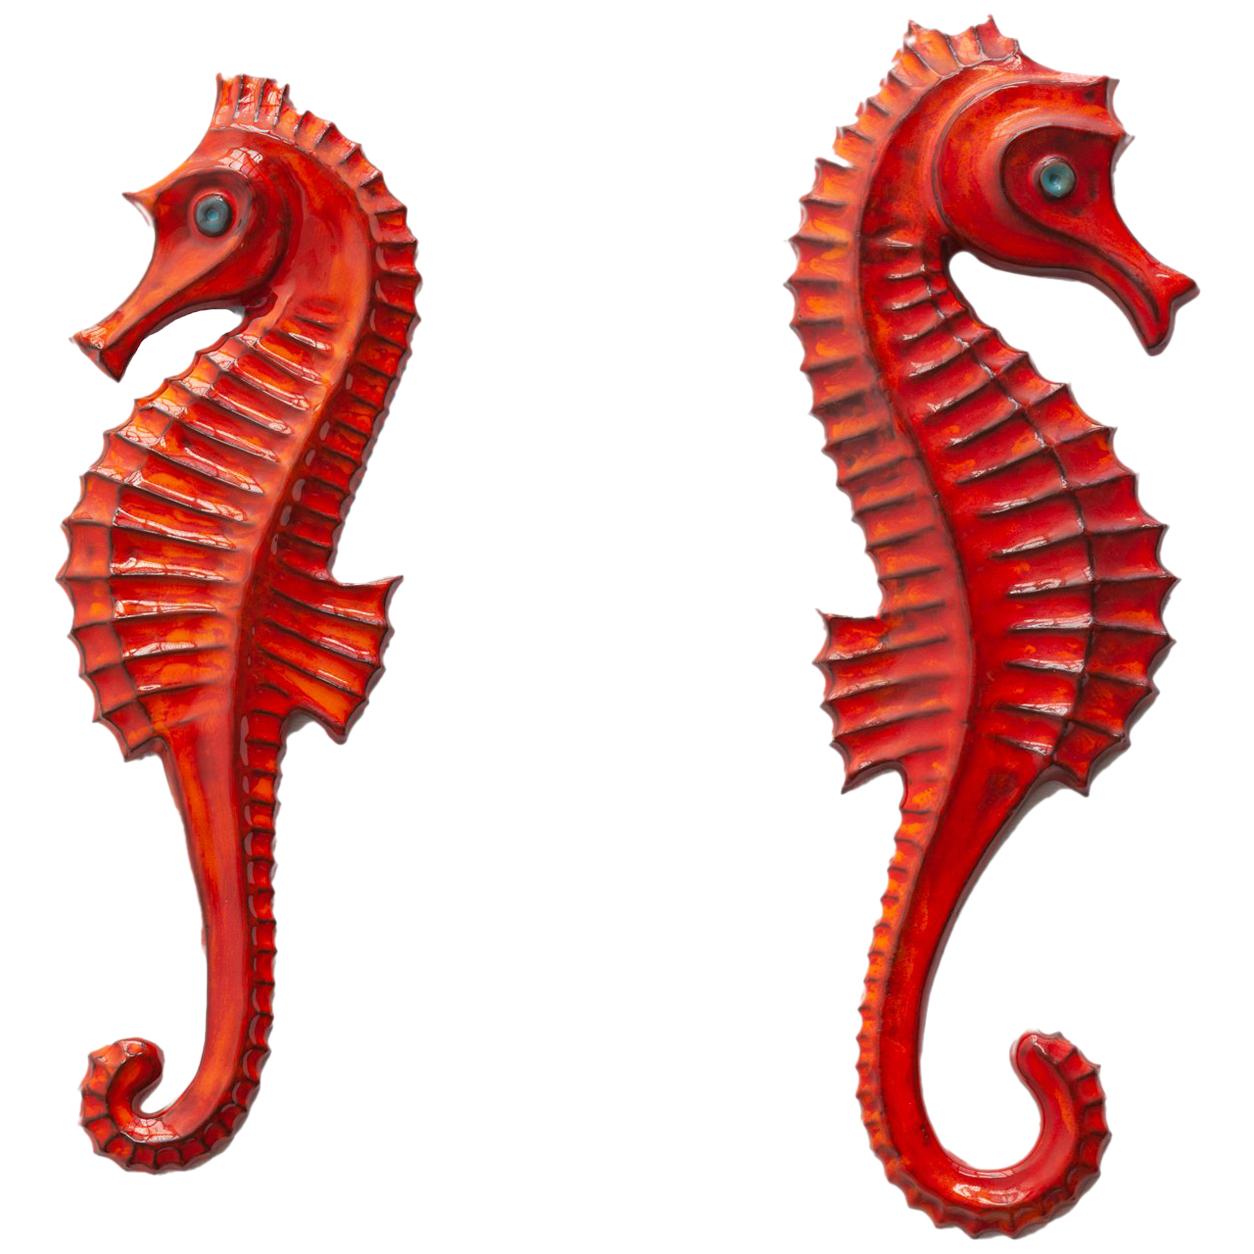 Seahorses Ceramic Wall Plaques Designed by F. Sanchez and Bayer, Belgium, 1960s